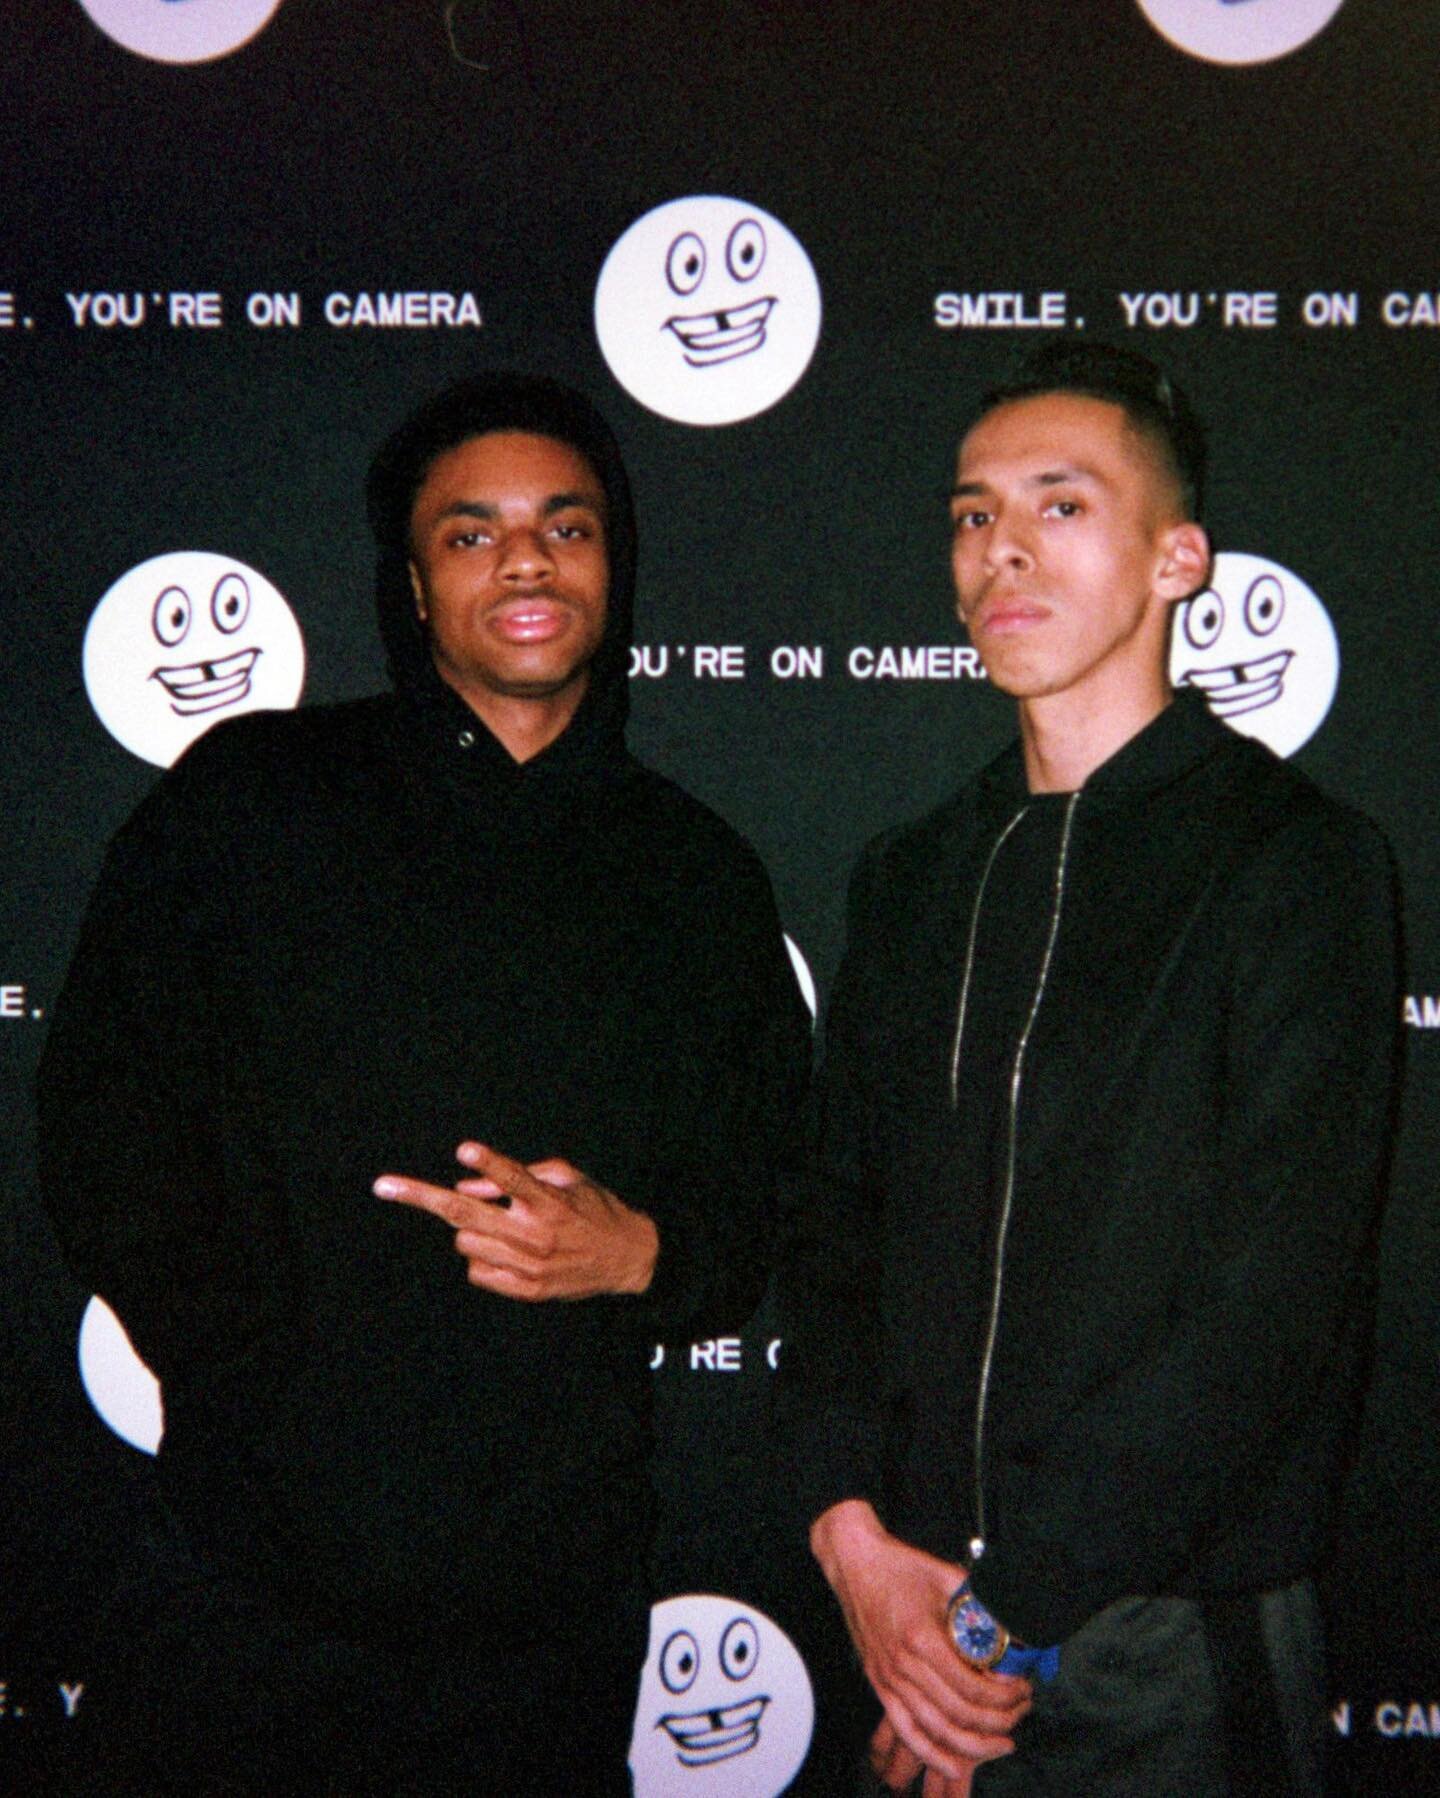 me and @vincestaples during his &ldquo;Smile, You&rsquo;re On Camera&rdquo; tour.